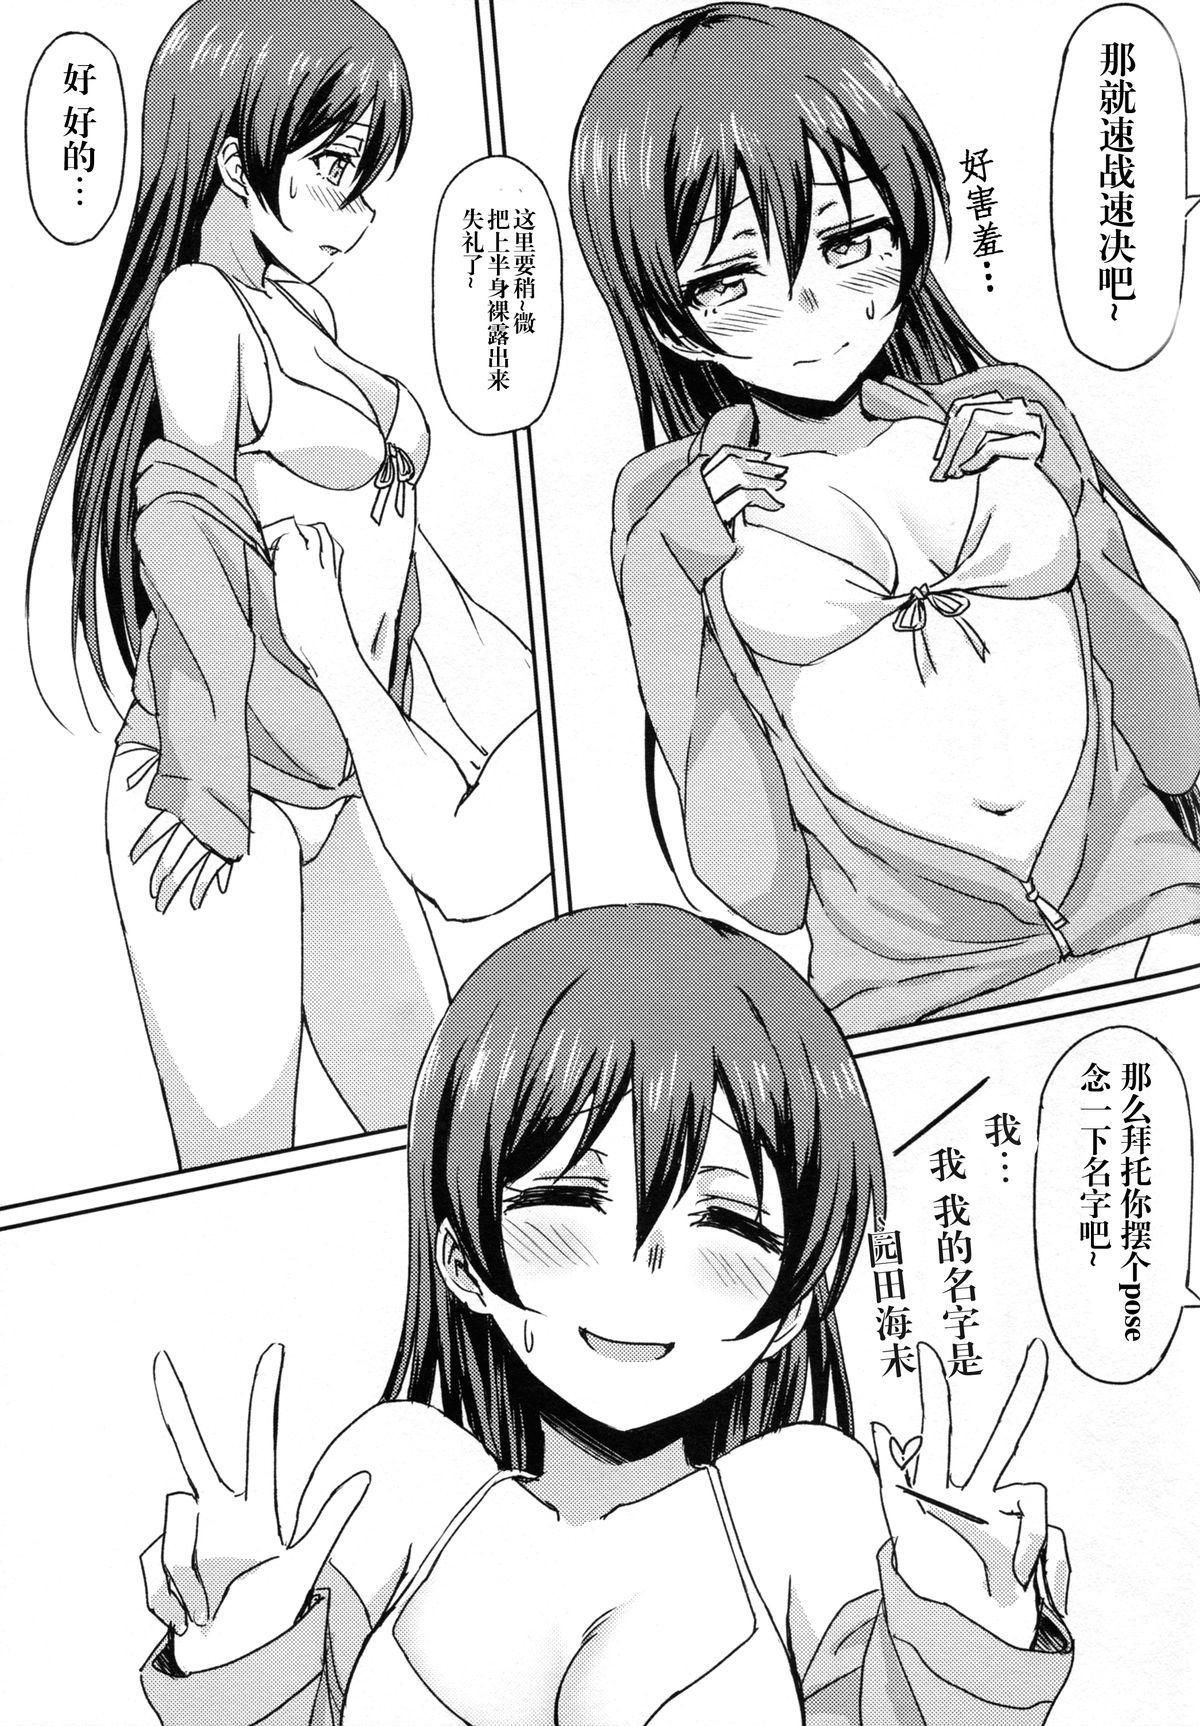 Face Fucking Hah,Wrench This! - Love live Stepsiblings - Page 8